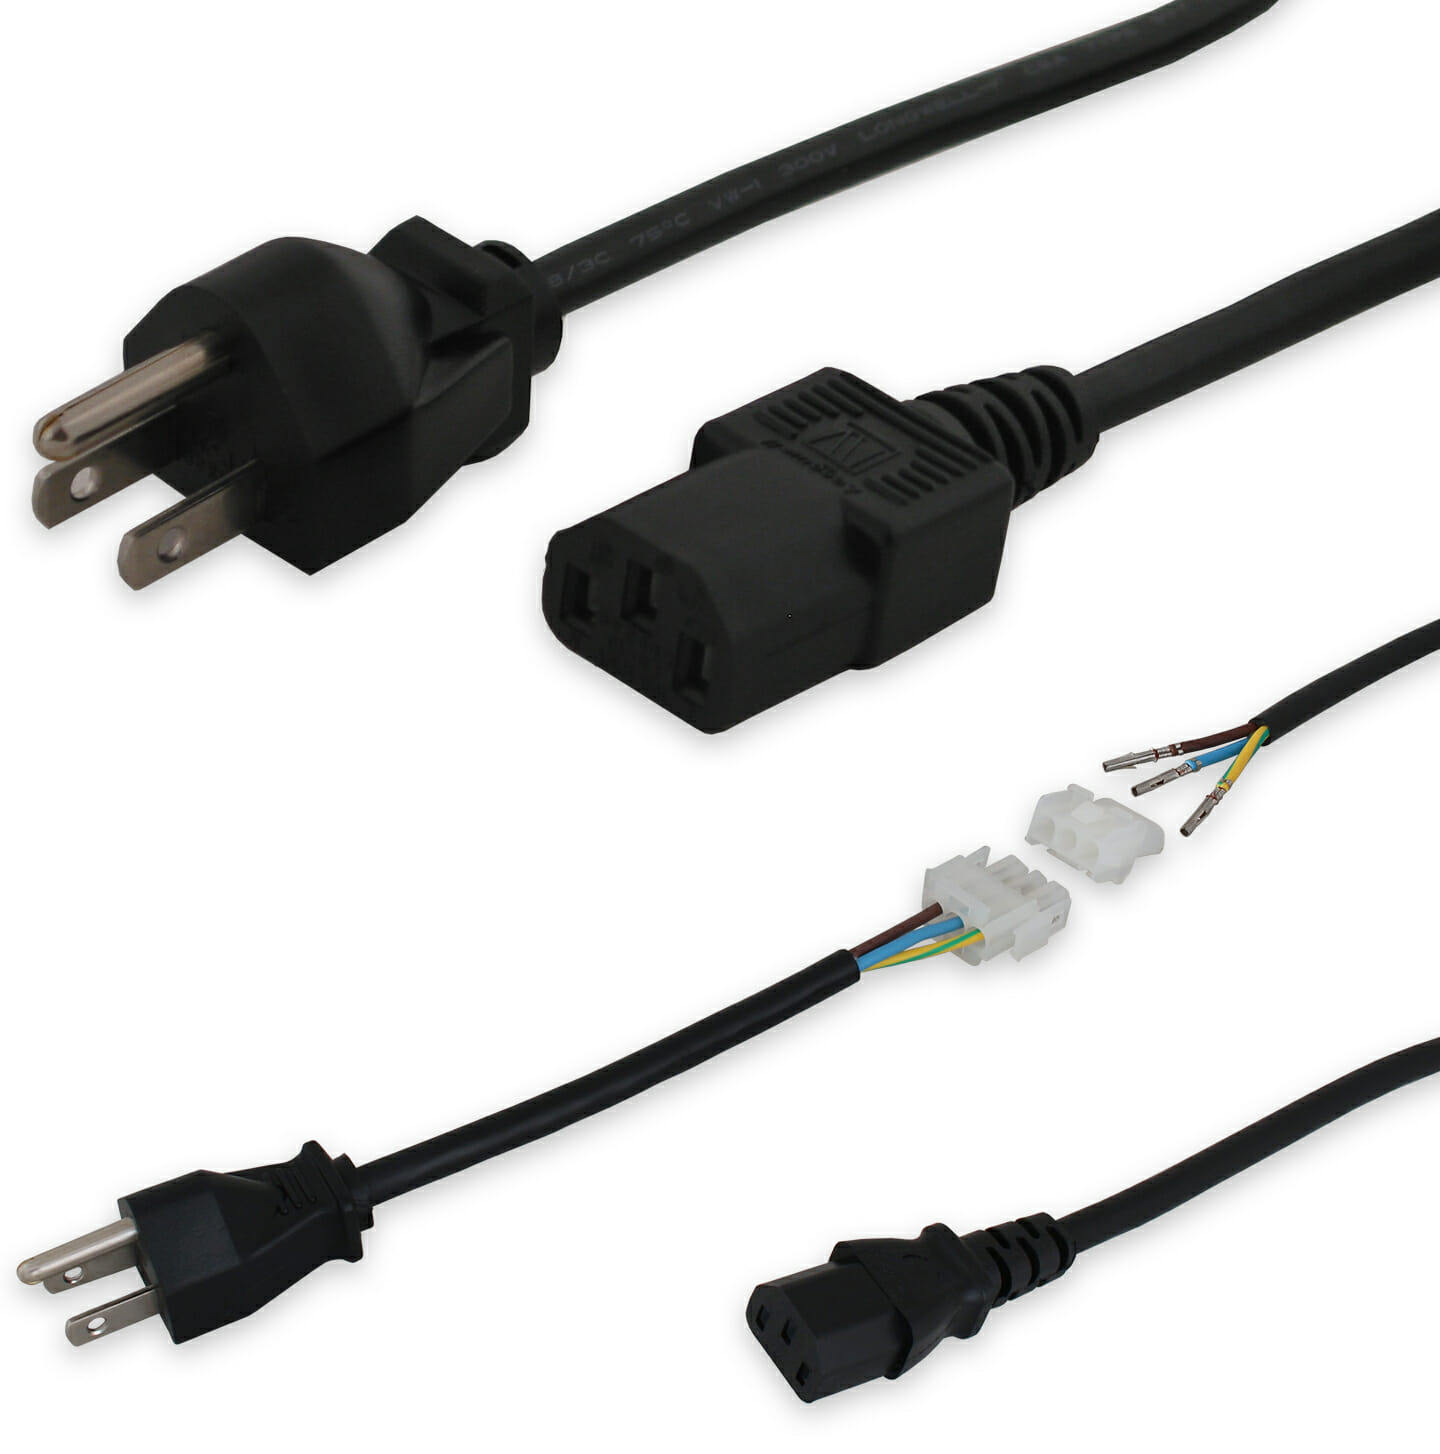 US Power Cable Options for industrial monitors, conduit and non-conduit models